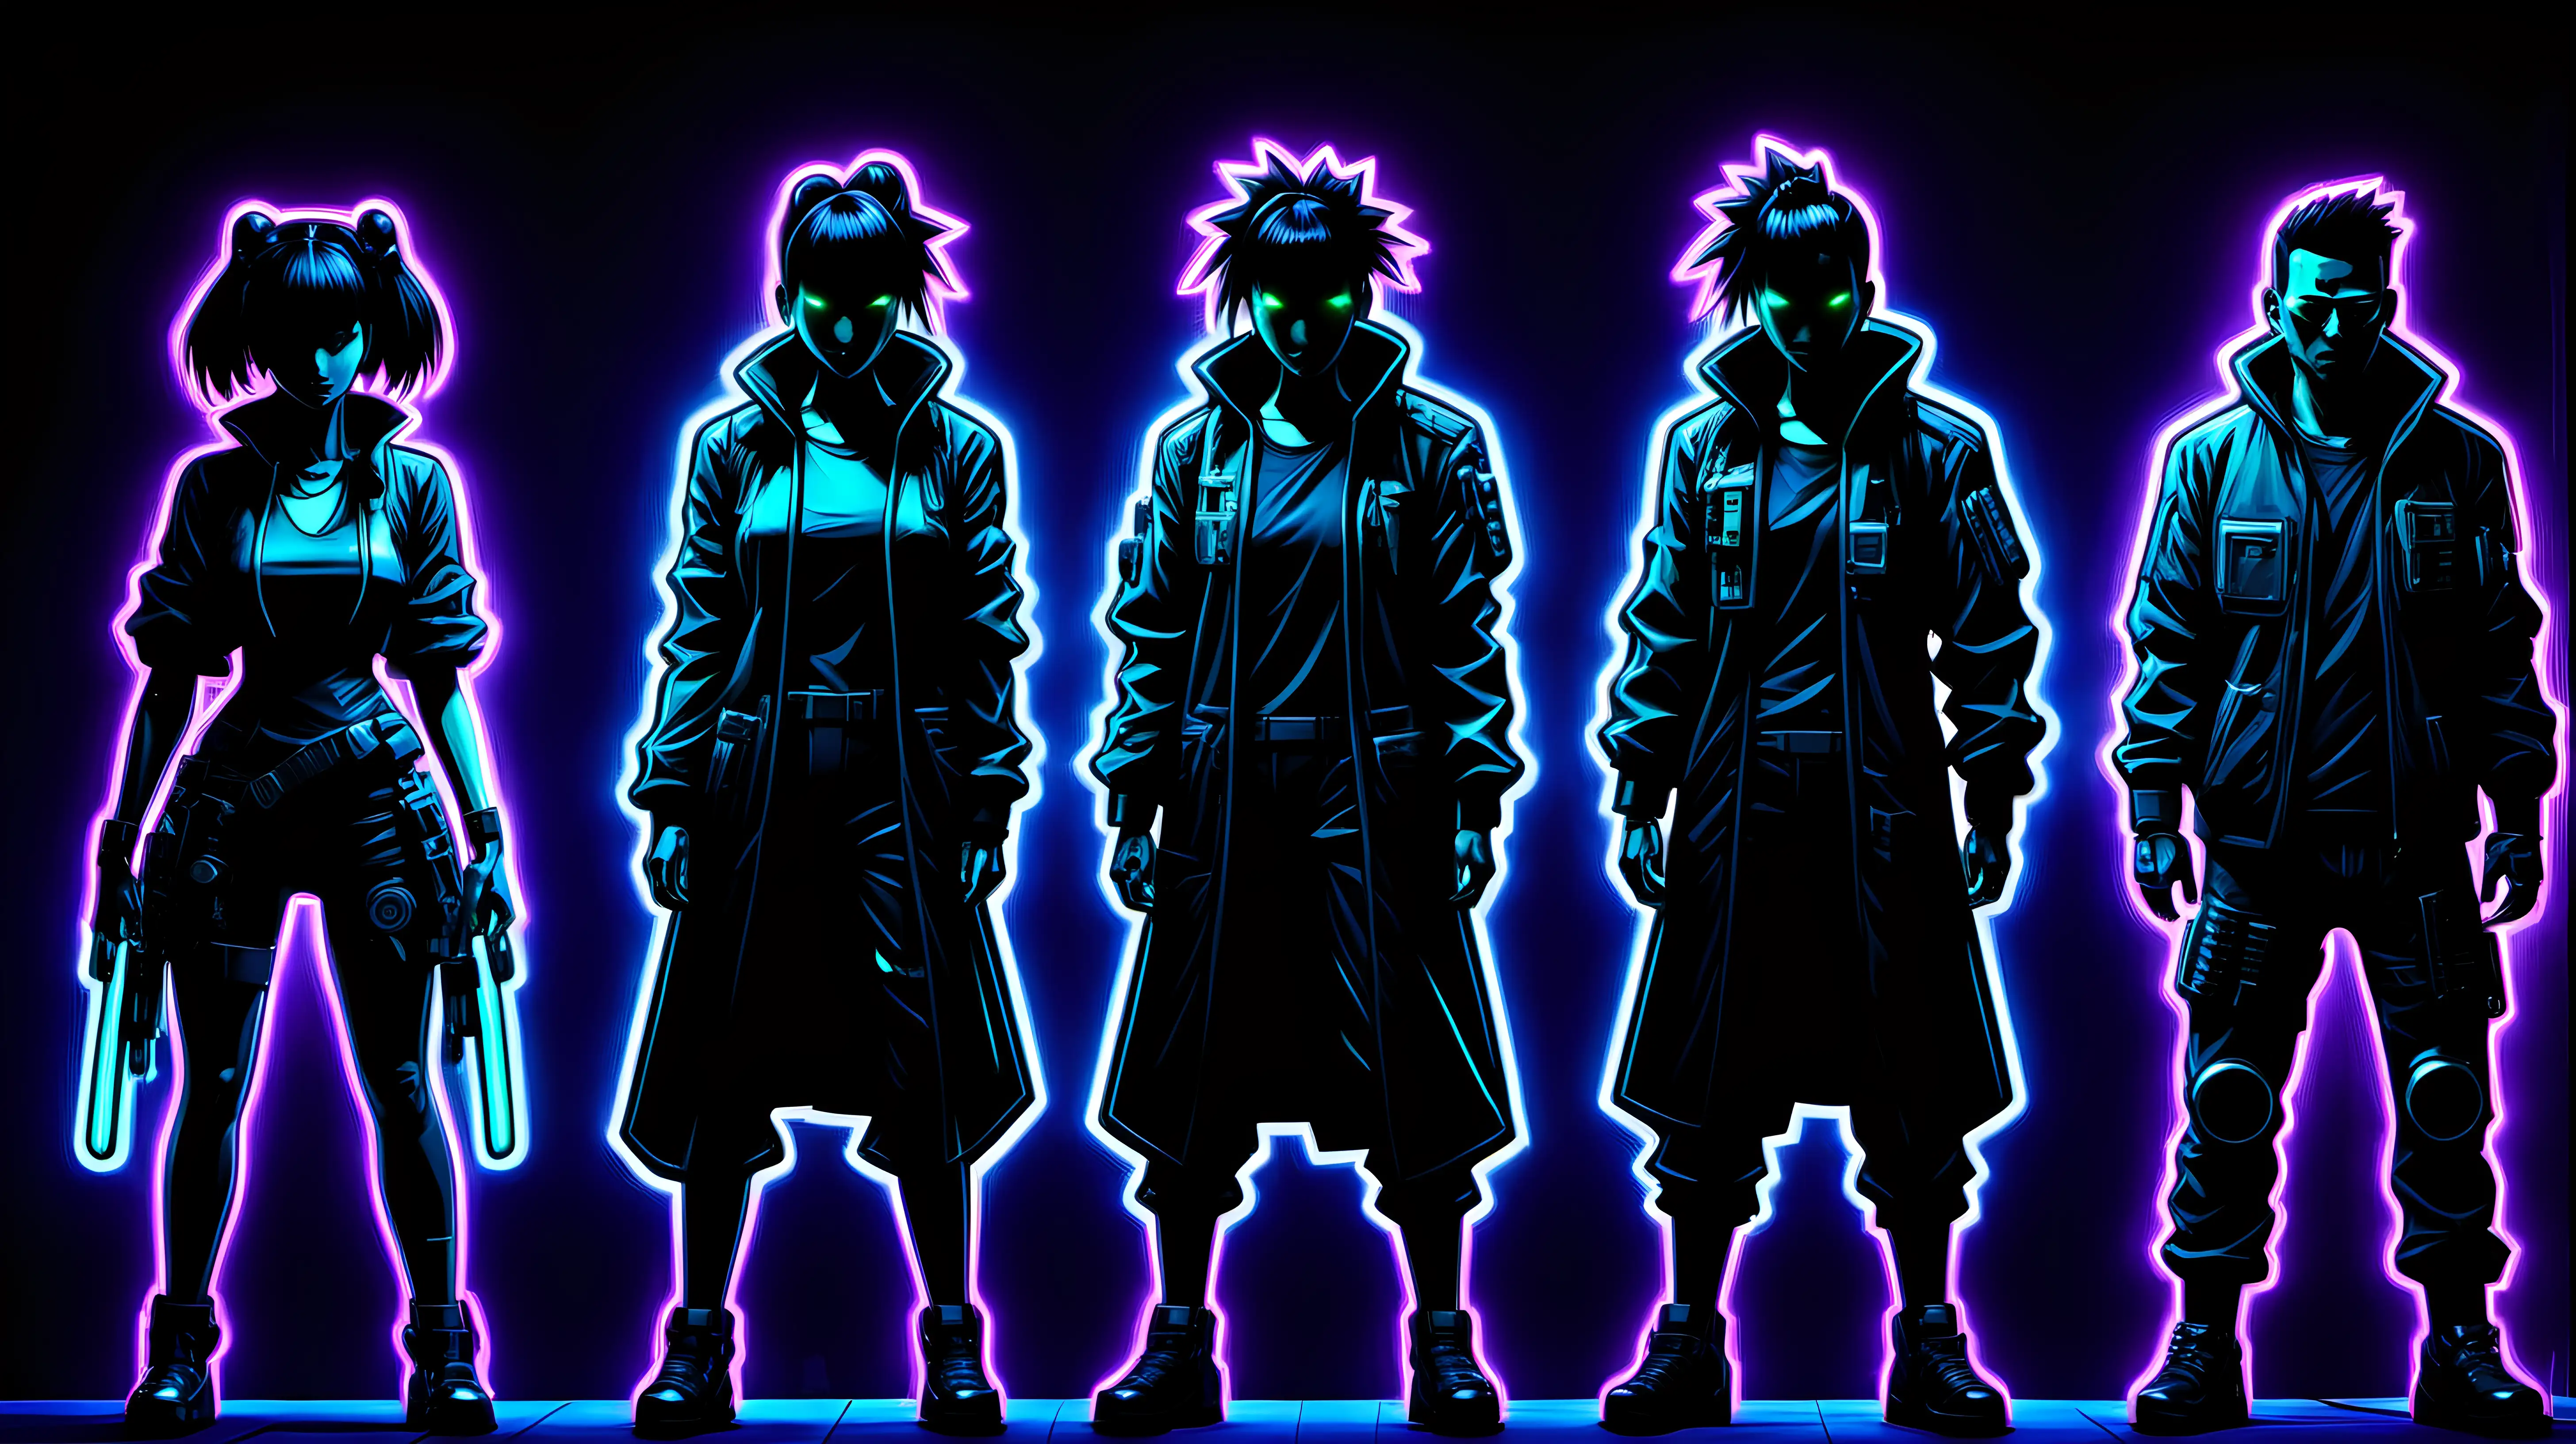 Japanese cyberpunk neon character silhouettes